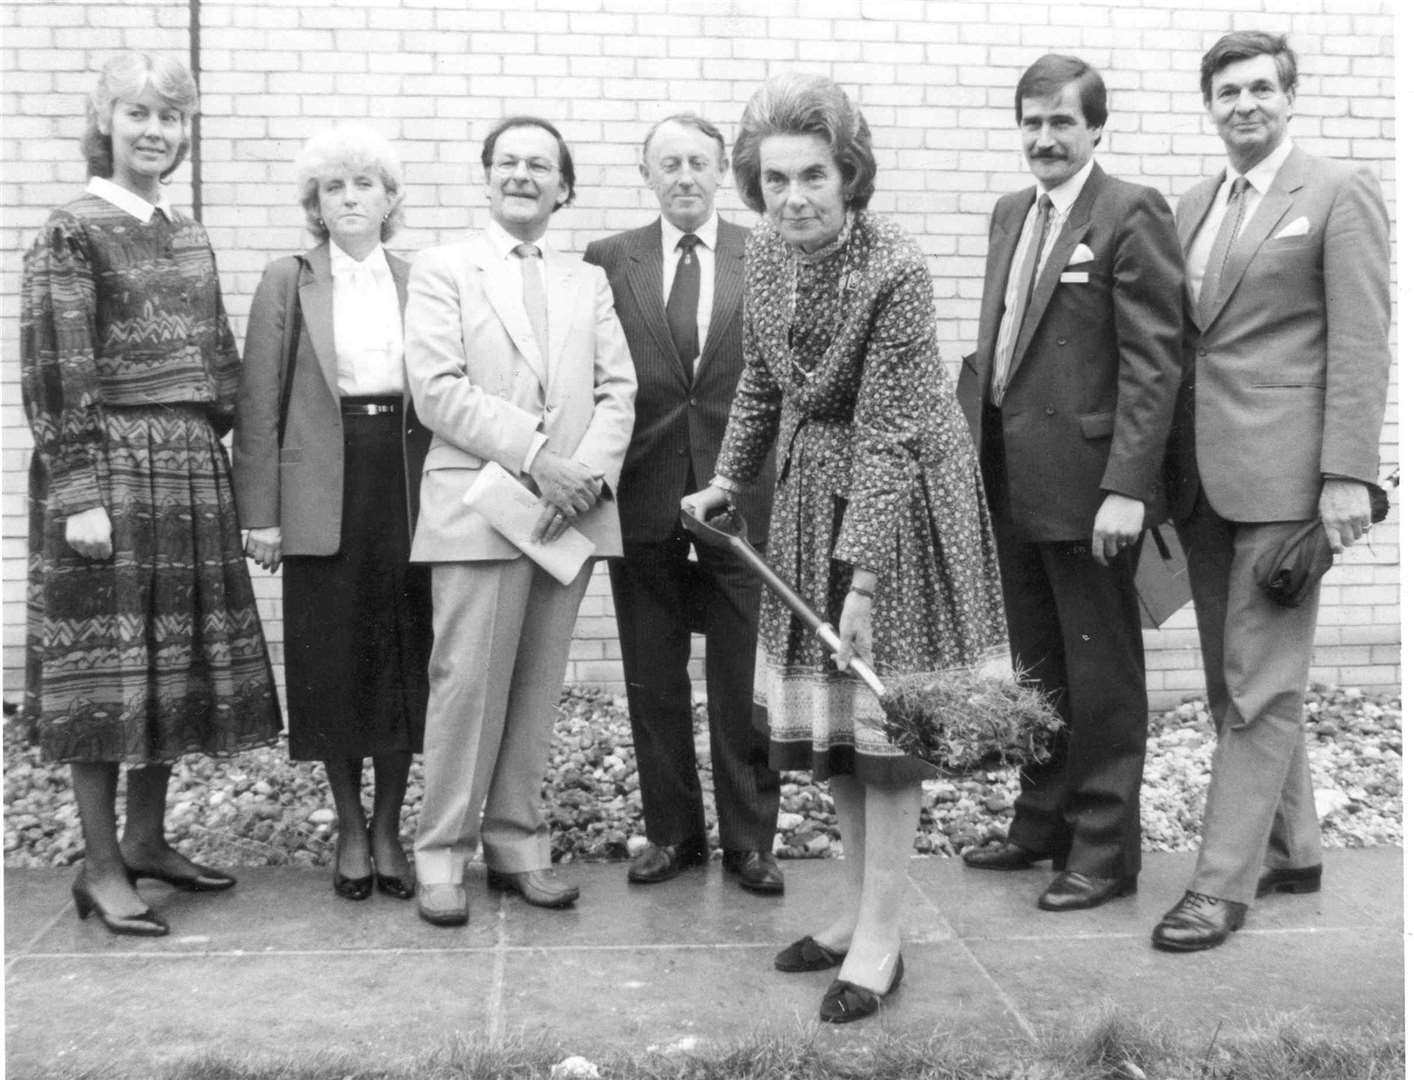 In November 1987, Countess Moutbatten of Burma, president of the Kent and Canterbury Hospital cancer care centre appeal, turned the first turf of the Mountbatten Centre - the county's first unit for diagnosing, treating and caring for cancer patients